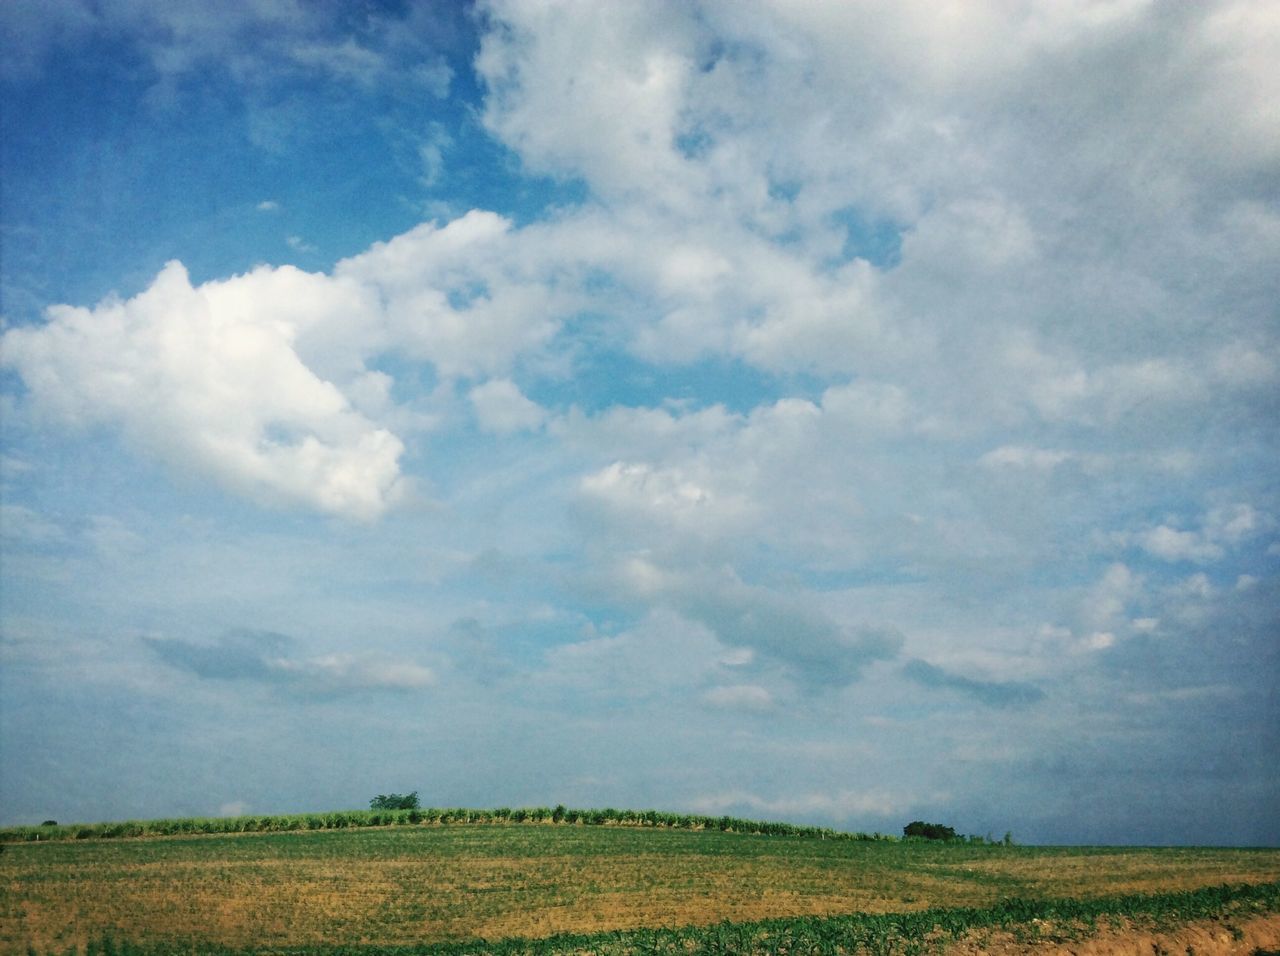 sky, tranquil scene, tranquility, scenics, landscape, cloud - sky, beauty in nature, nature, cloud, field, cloudy, rural scene, idyllic, horizon over land, tree, blue, non-urban scene, growth, day, outdoors